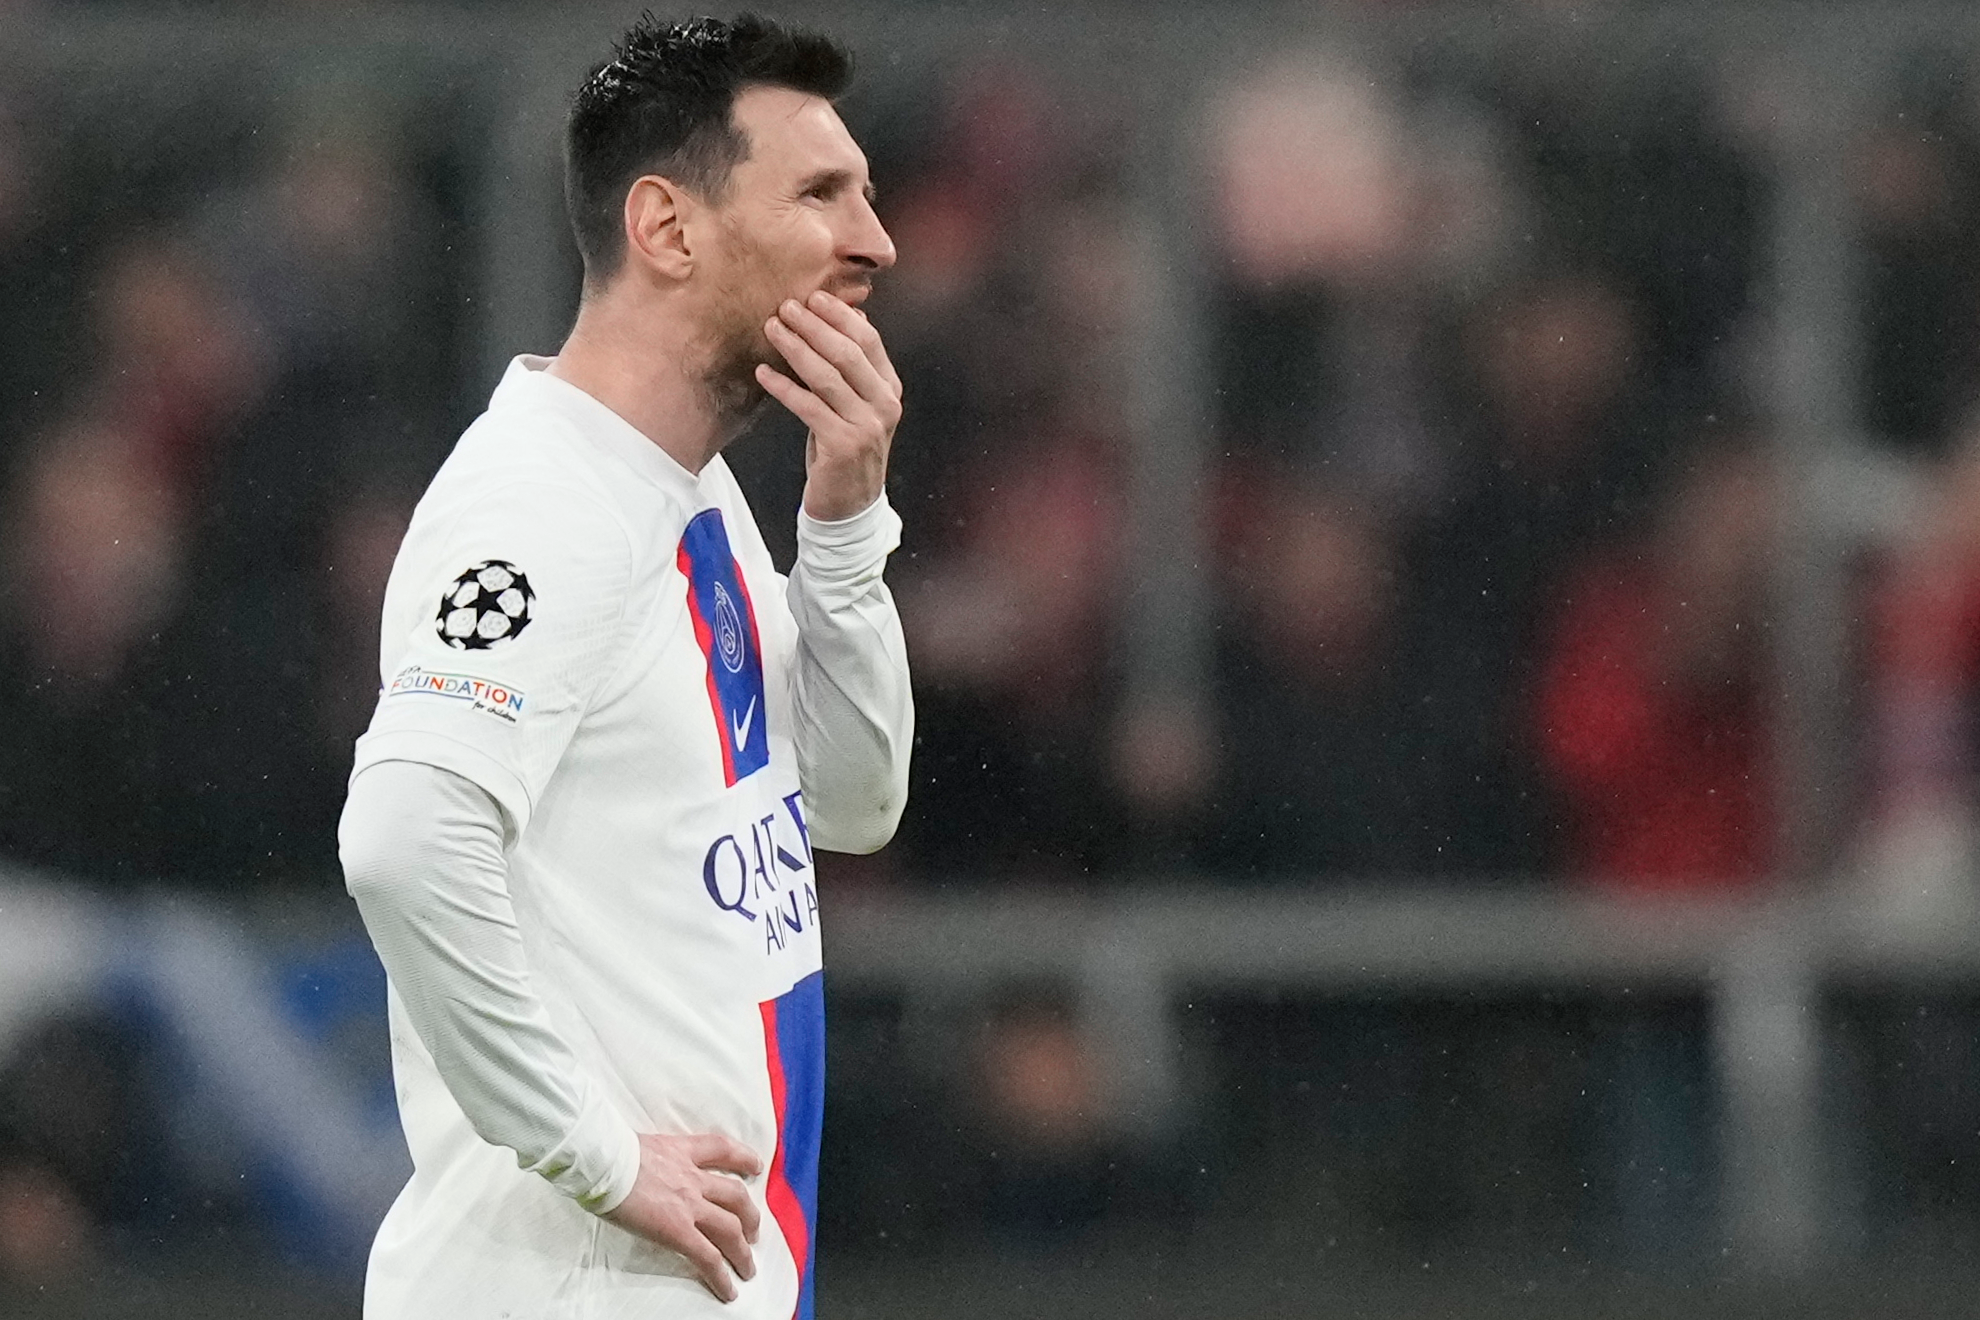 Leo Messi, mid-game with PSG